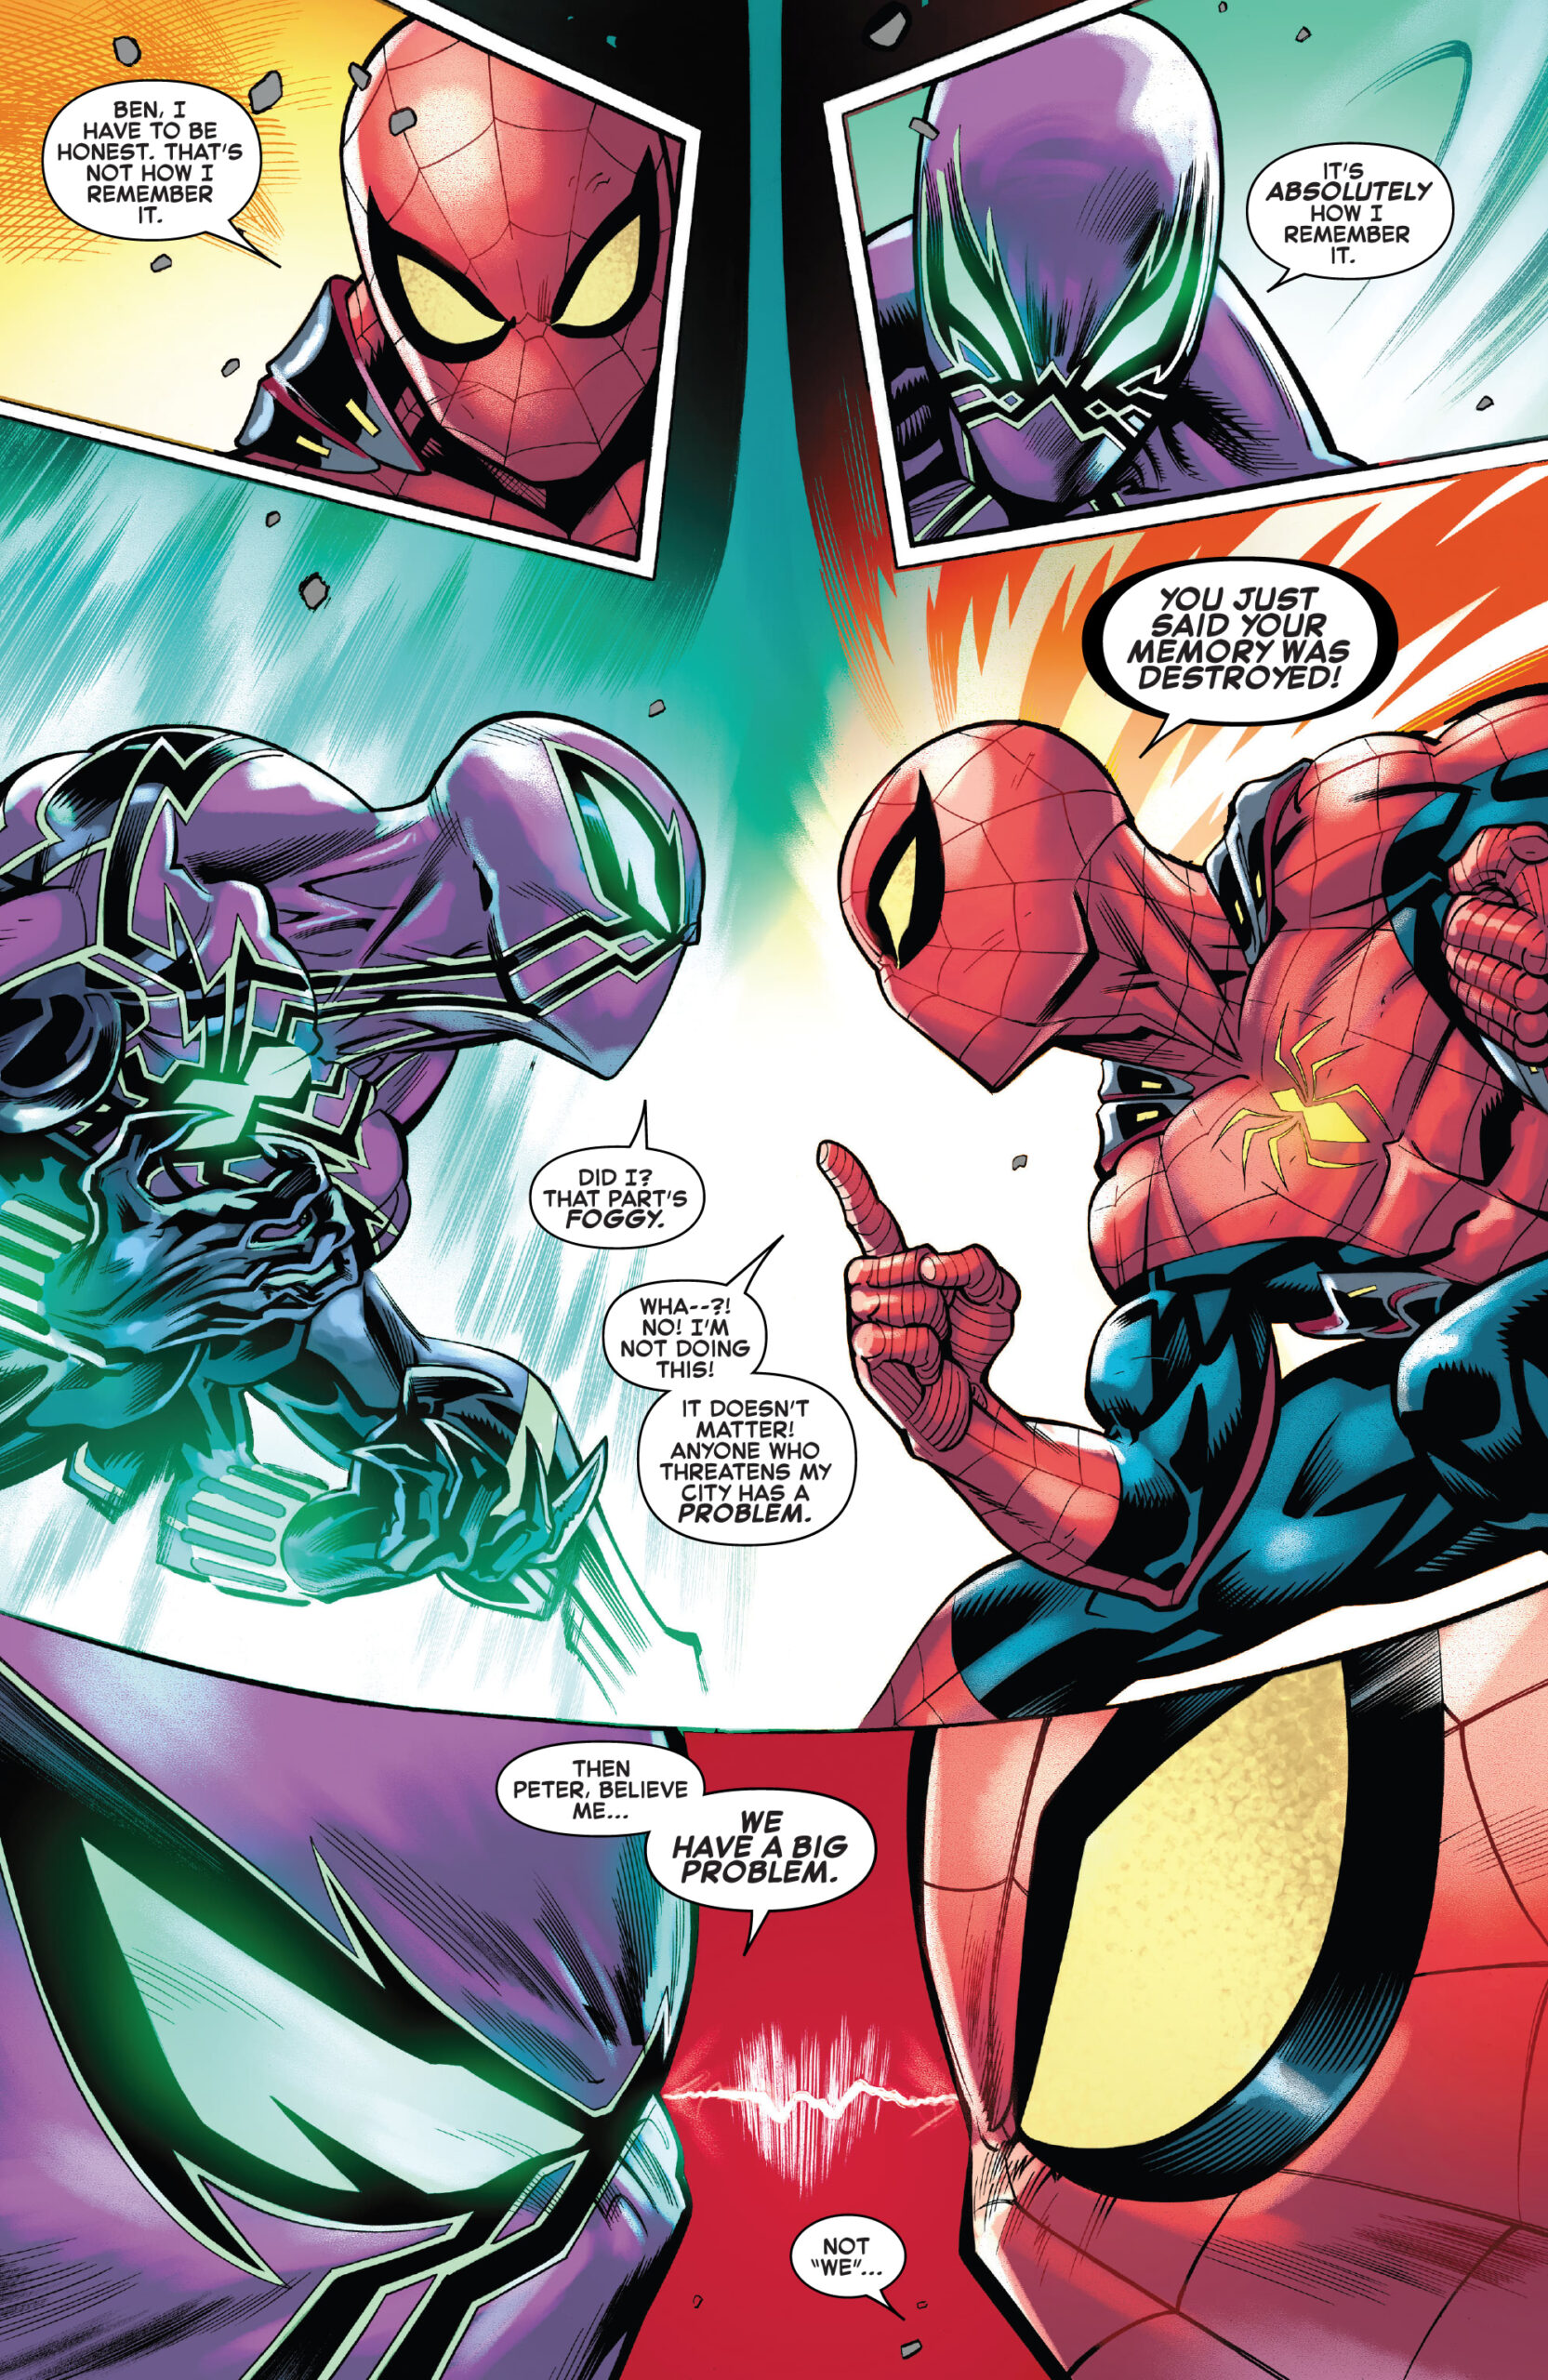 Peter Parker tries to make sense of Ben Reilly's shift to the dark side in Amazing Spider-Man Vol. 6 #16 "Spider-Man vs Chasm" (2022), Marvel Comics. Words by Zeb Wells, art by Ed McGuinness, Cliff Rathburn, Marcio Menyz, and Joe Caramagna.